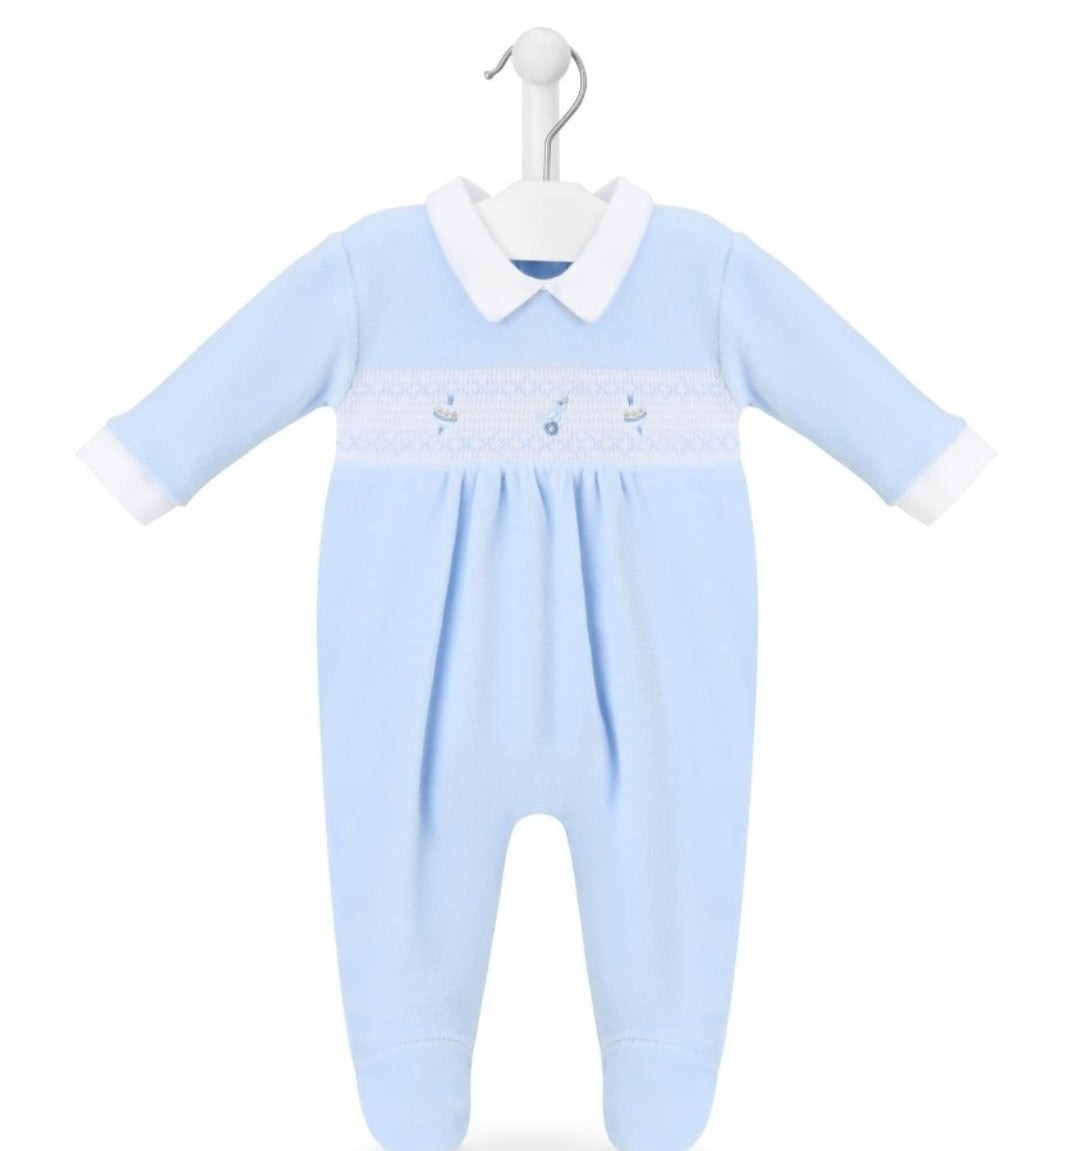 Baby Boys Blue Velour Spinning Top Smocked Sleepsuit